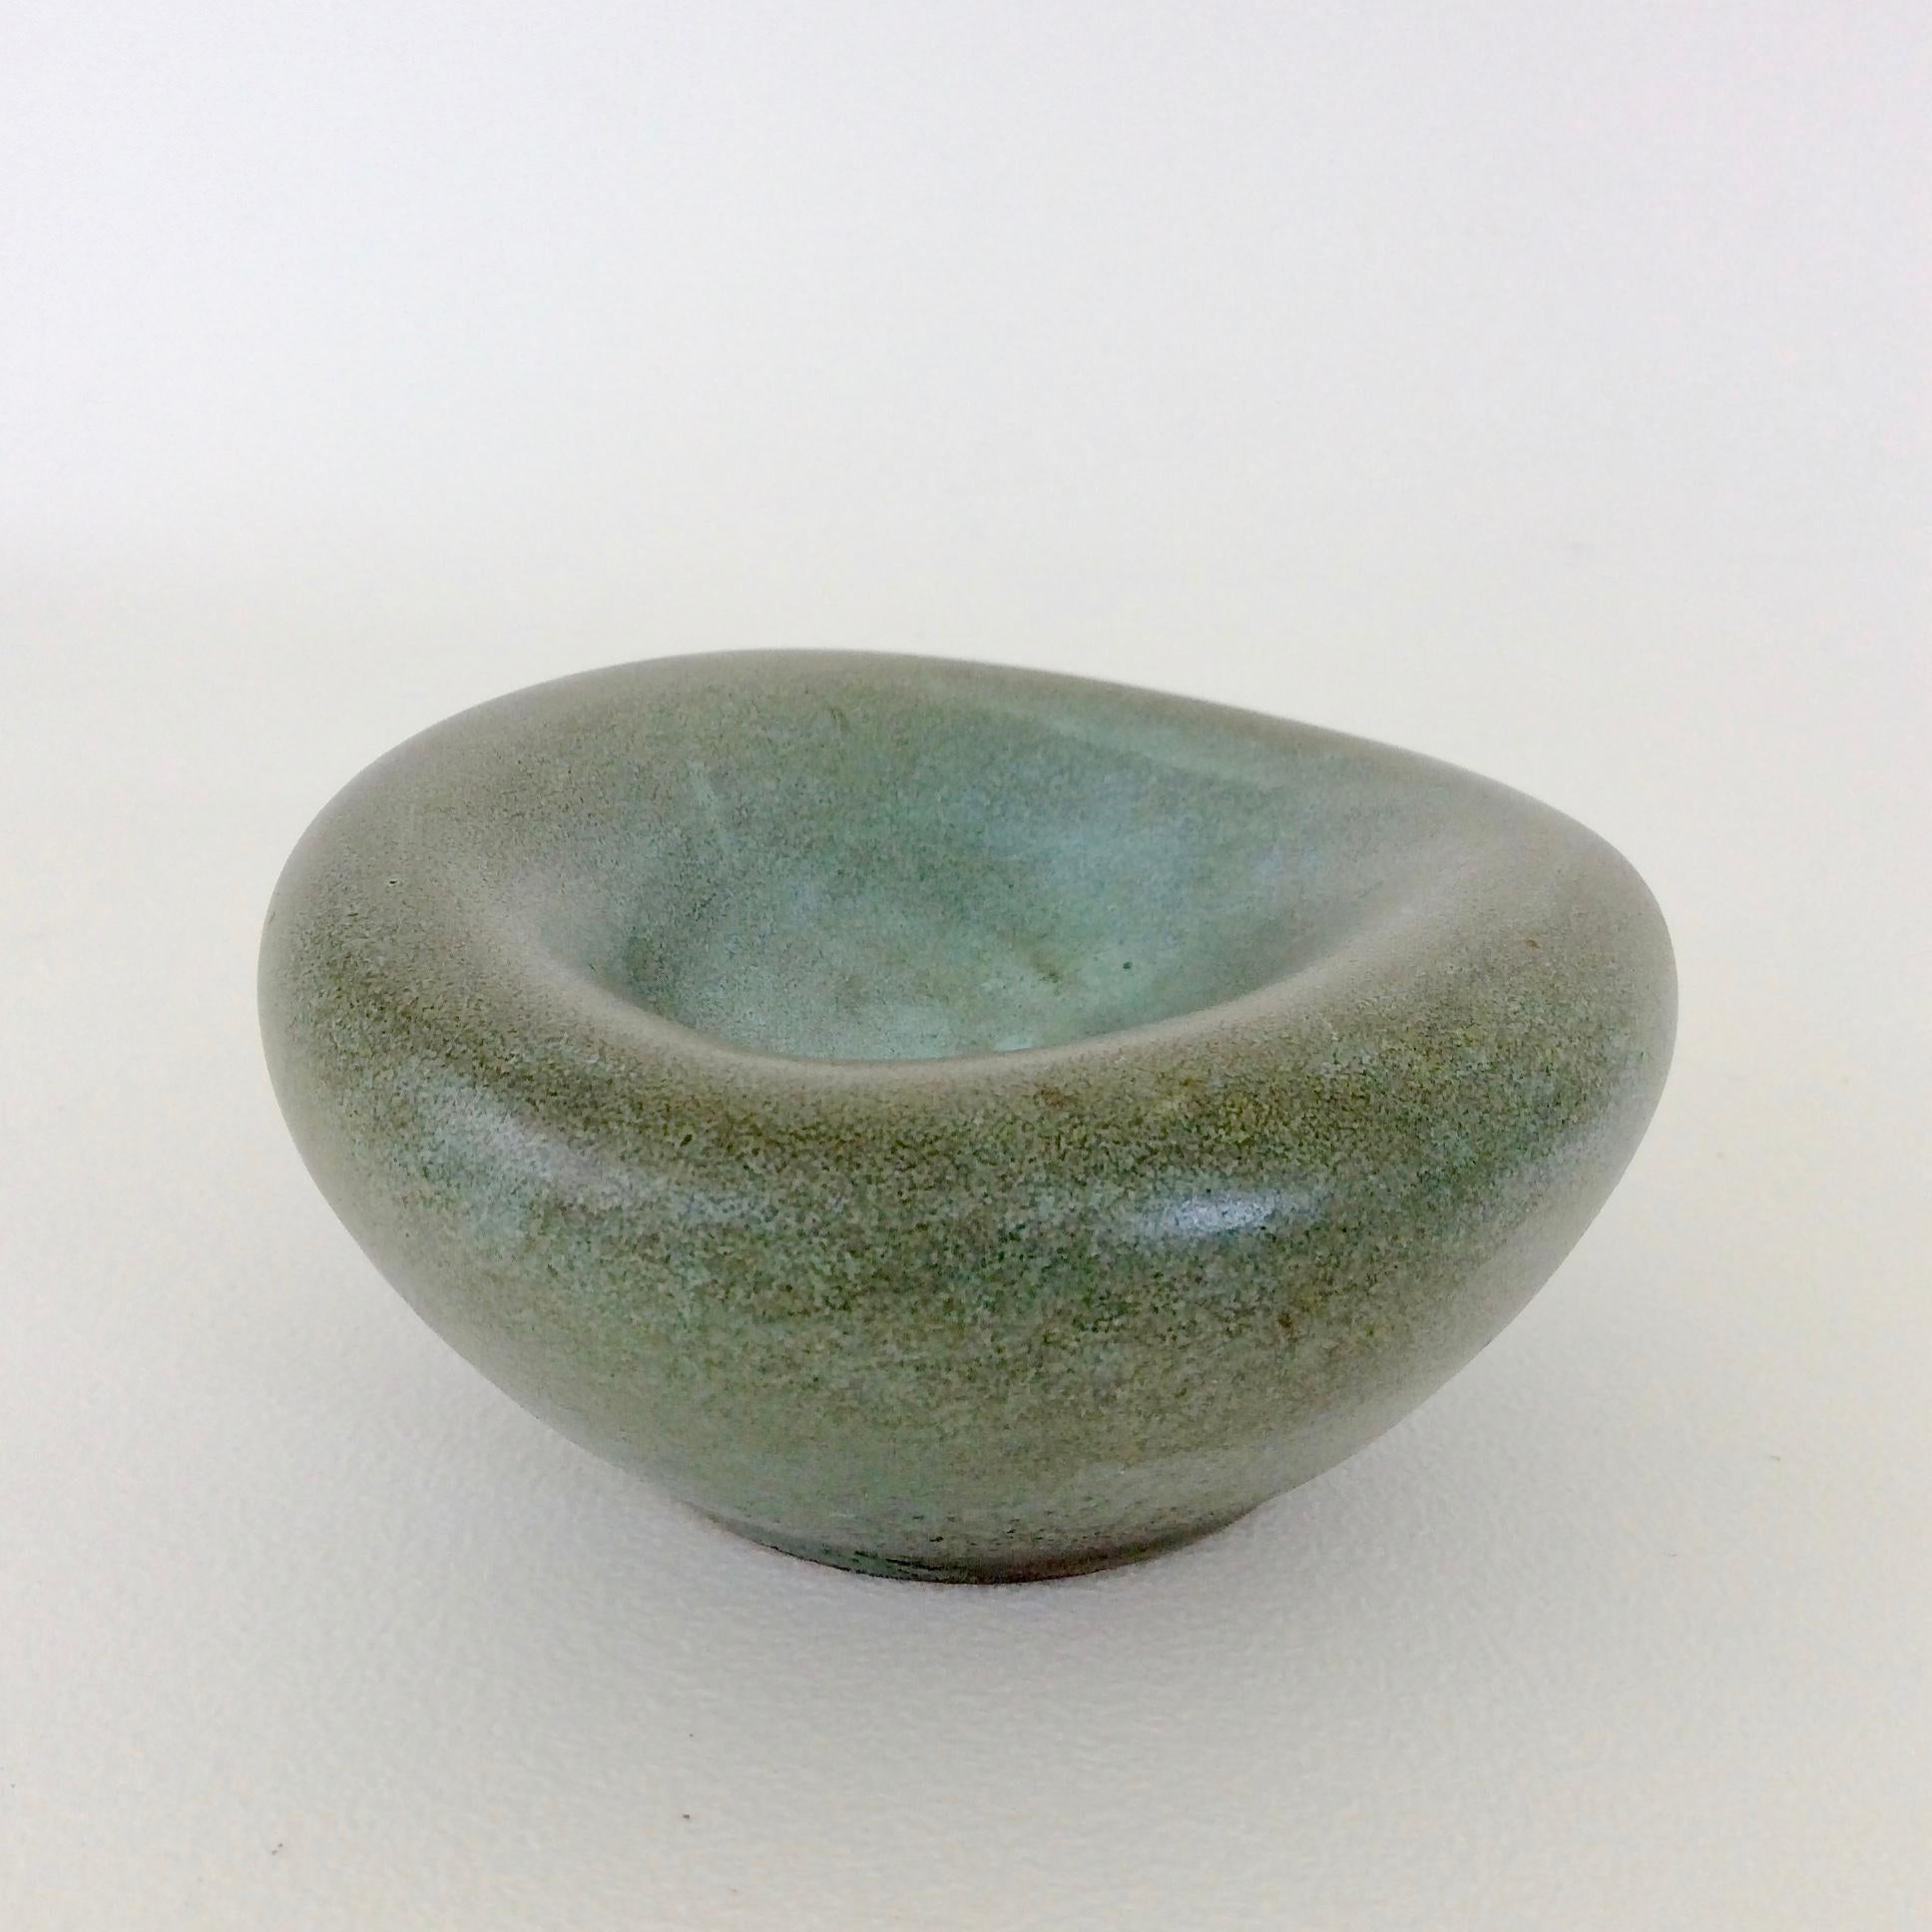 Nice Madoura bowl or vide-poche, circa 1950, France.
Grey-green ceramic.
Stamped Madoura underneath.
Dimensions: diameter 10 cm, 5cm H.
All purchases are covered by our Buyer Protection Guarantee.
This item can be returned within 14 days of